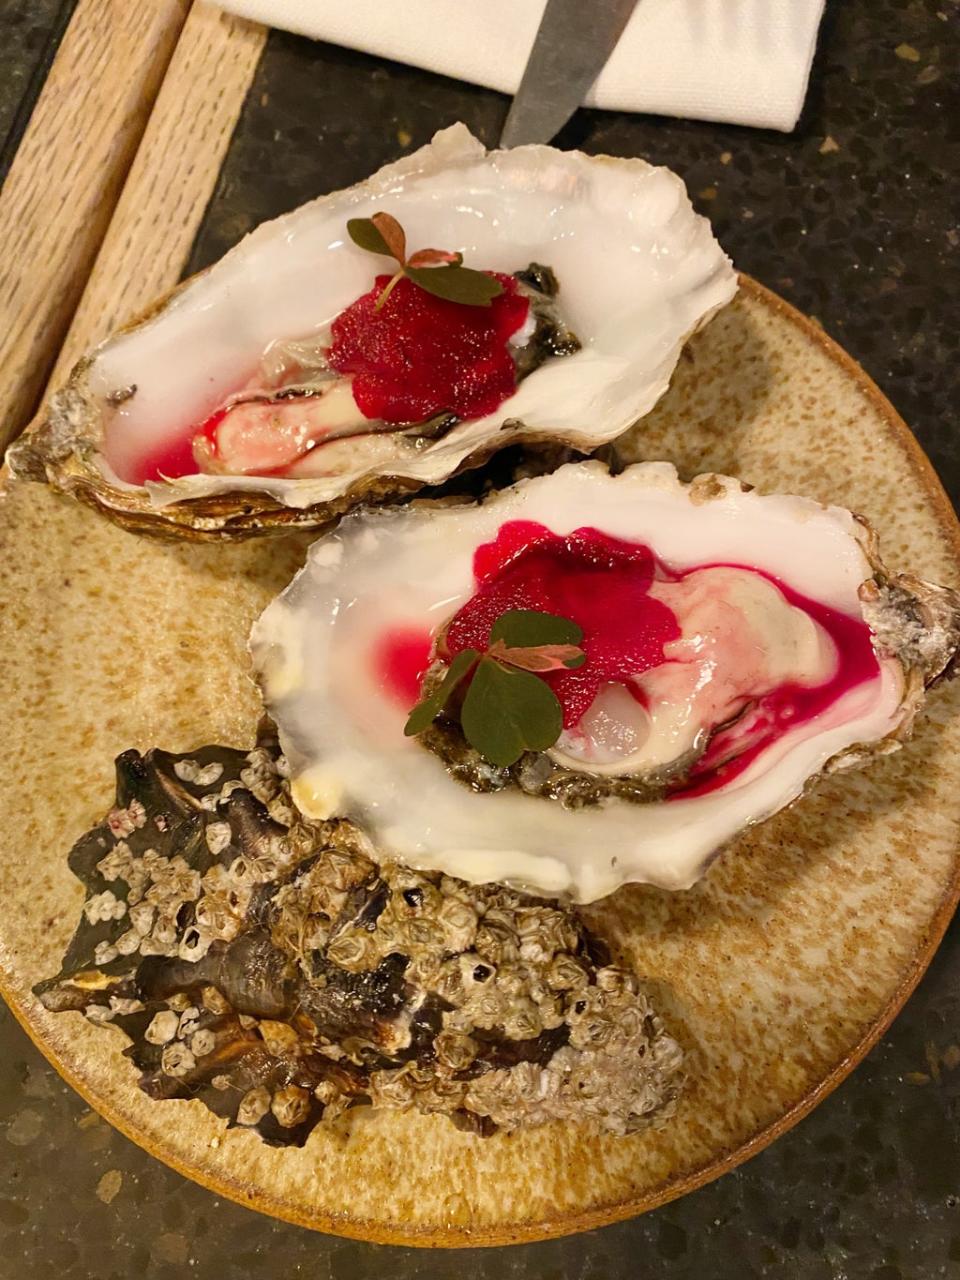 Carlingford oysters with a beetroot reduction and sorrel (Molly Codyre)